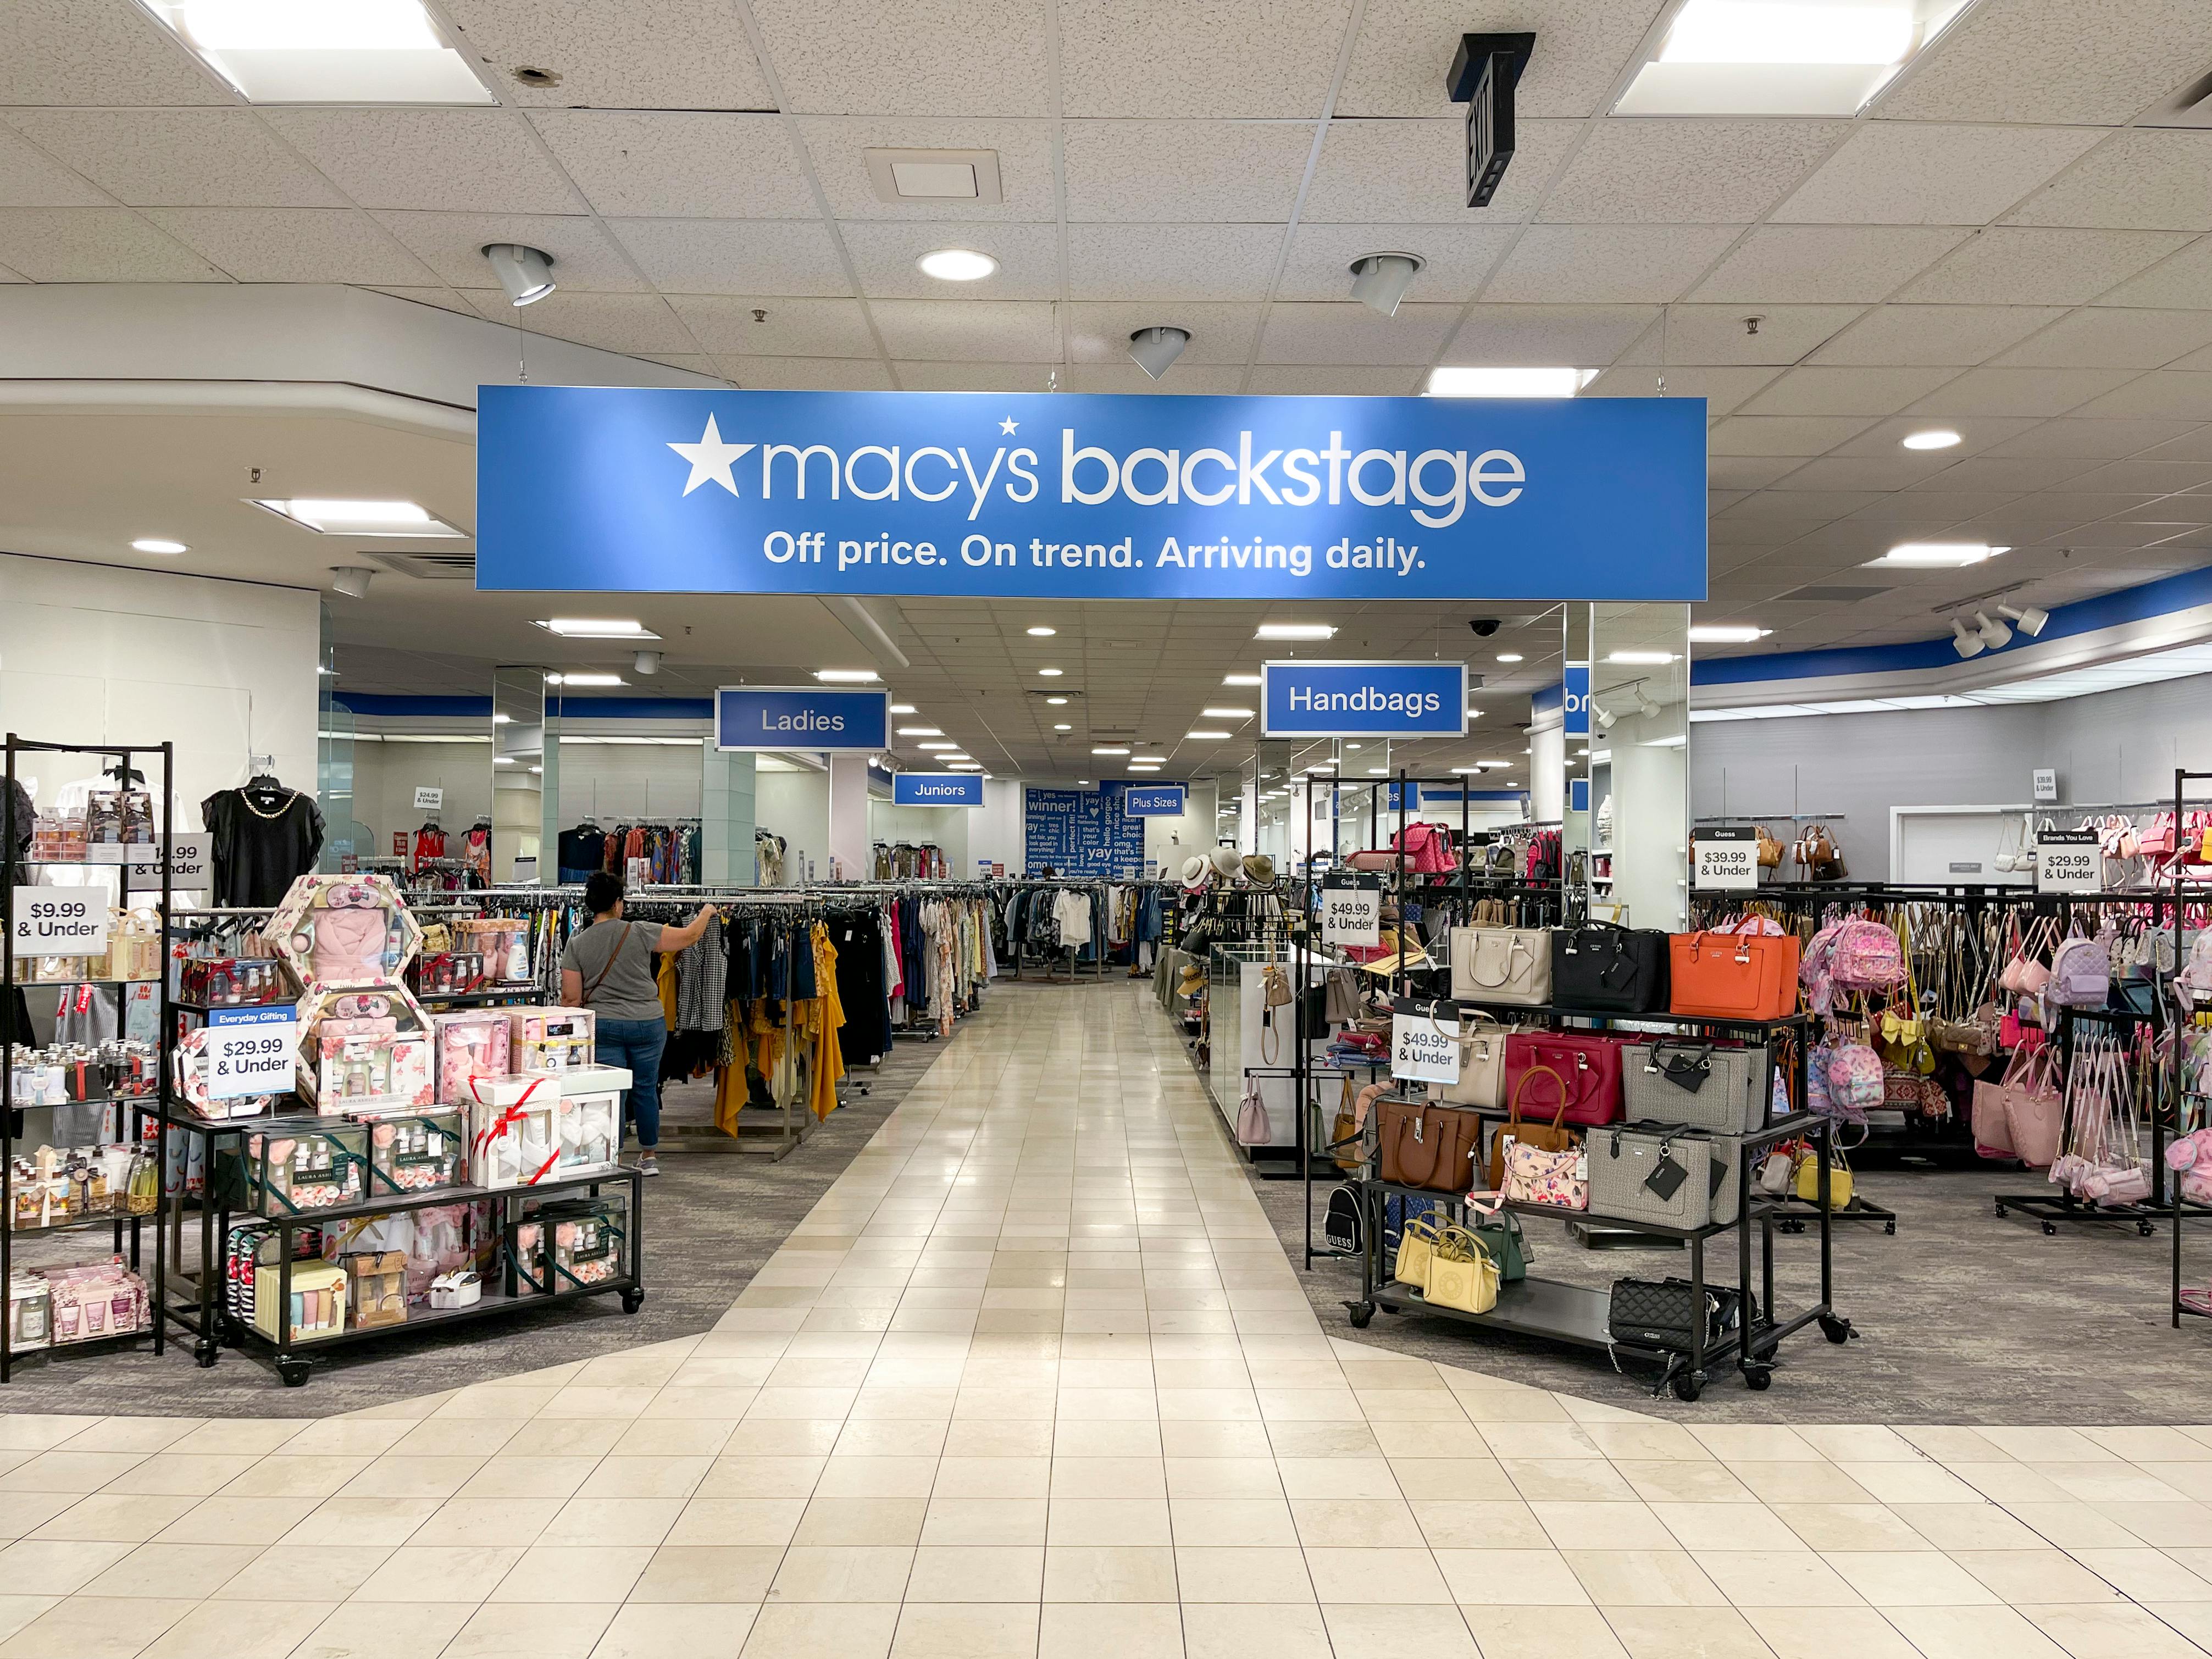 Your Complete Guide to Macy's Backstage - The Krazy Coupon Lady